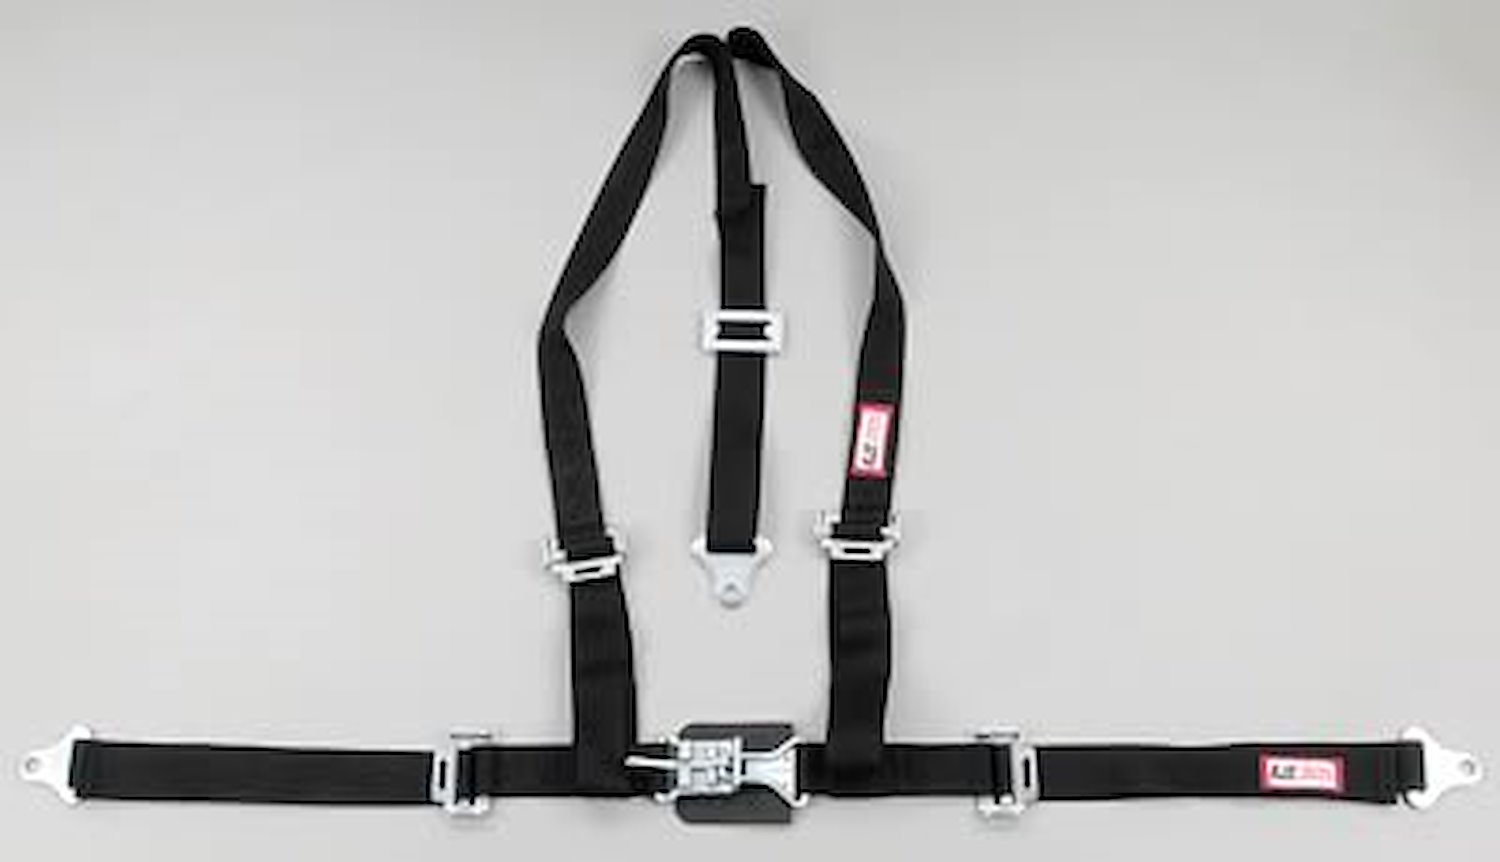 NON-SFI L&L HARNESS 2 PULL UP Lap Belt SNAP SEWN IN 2 S.H. Y FLOOR Mount WRAP/BOLT YELLOW